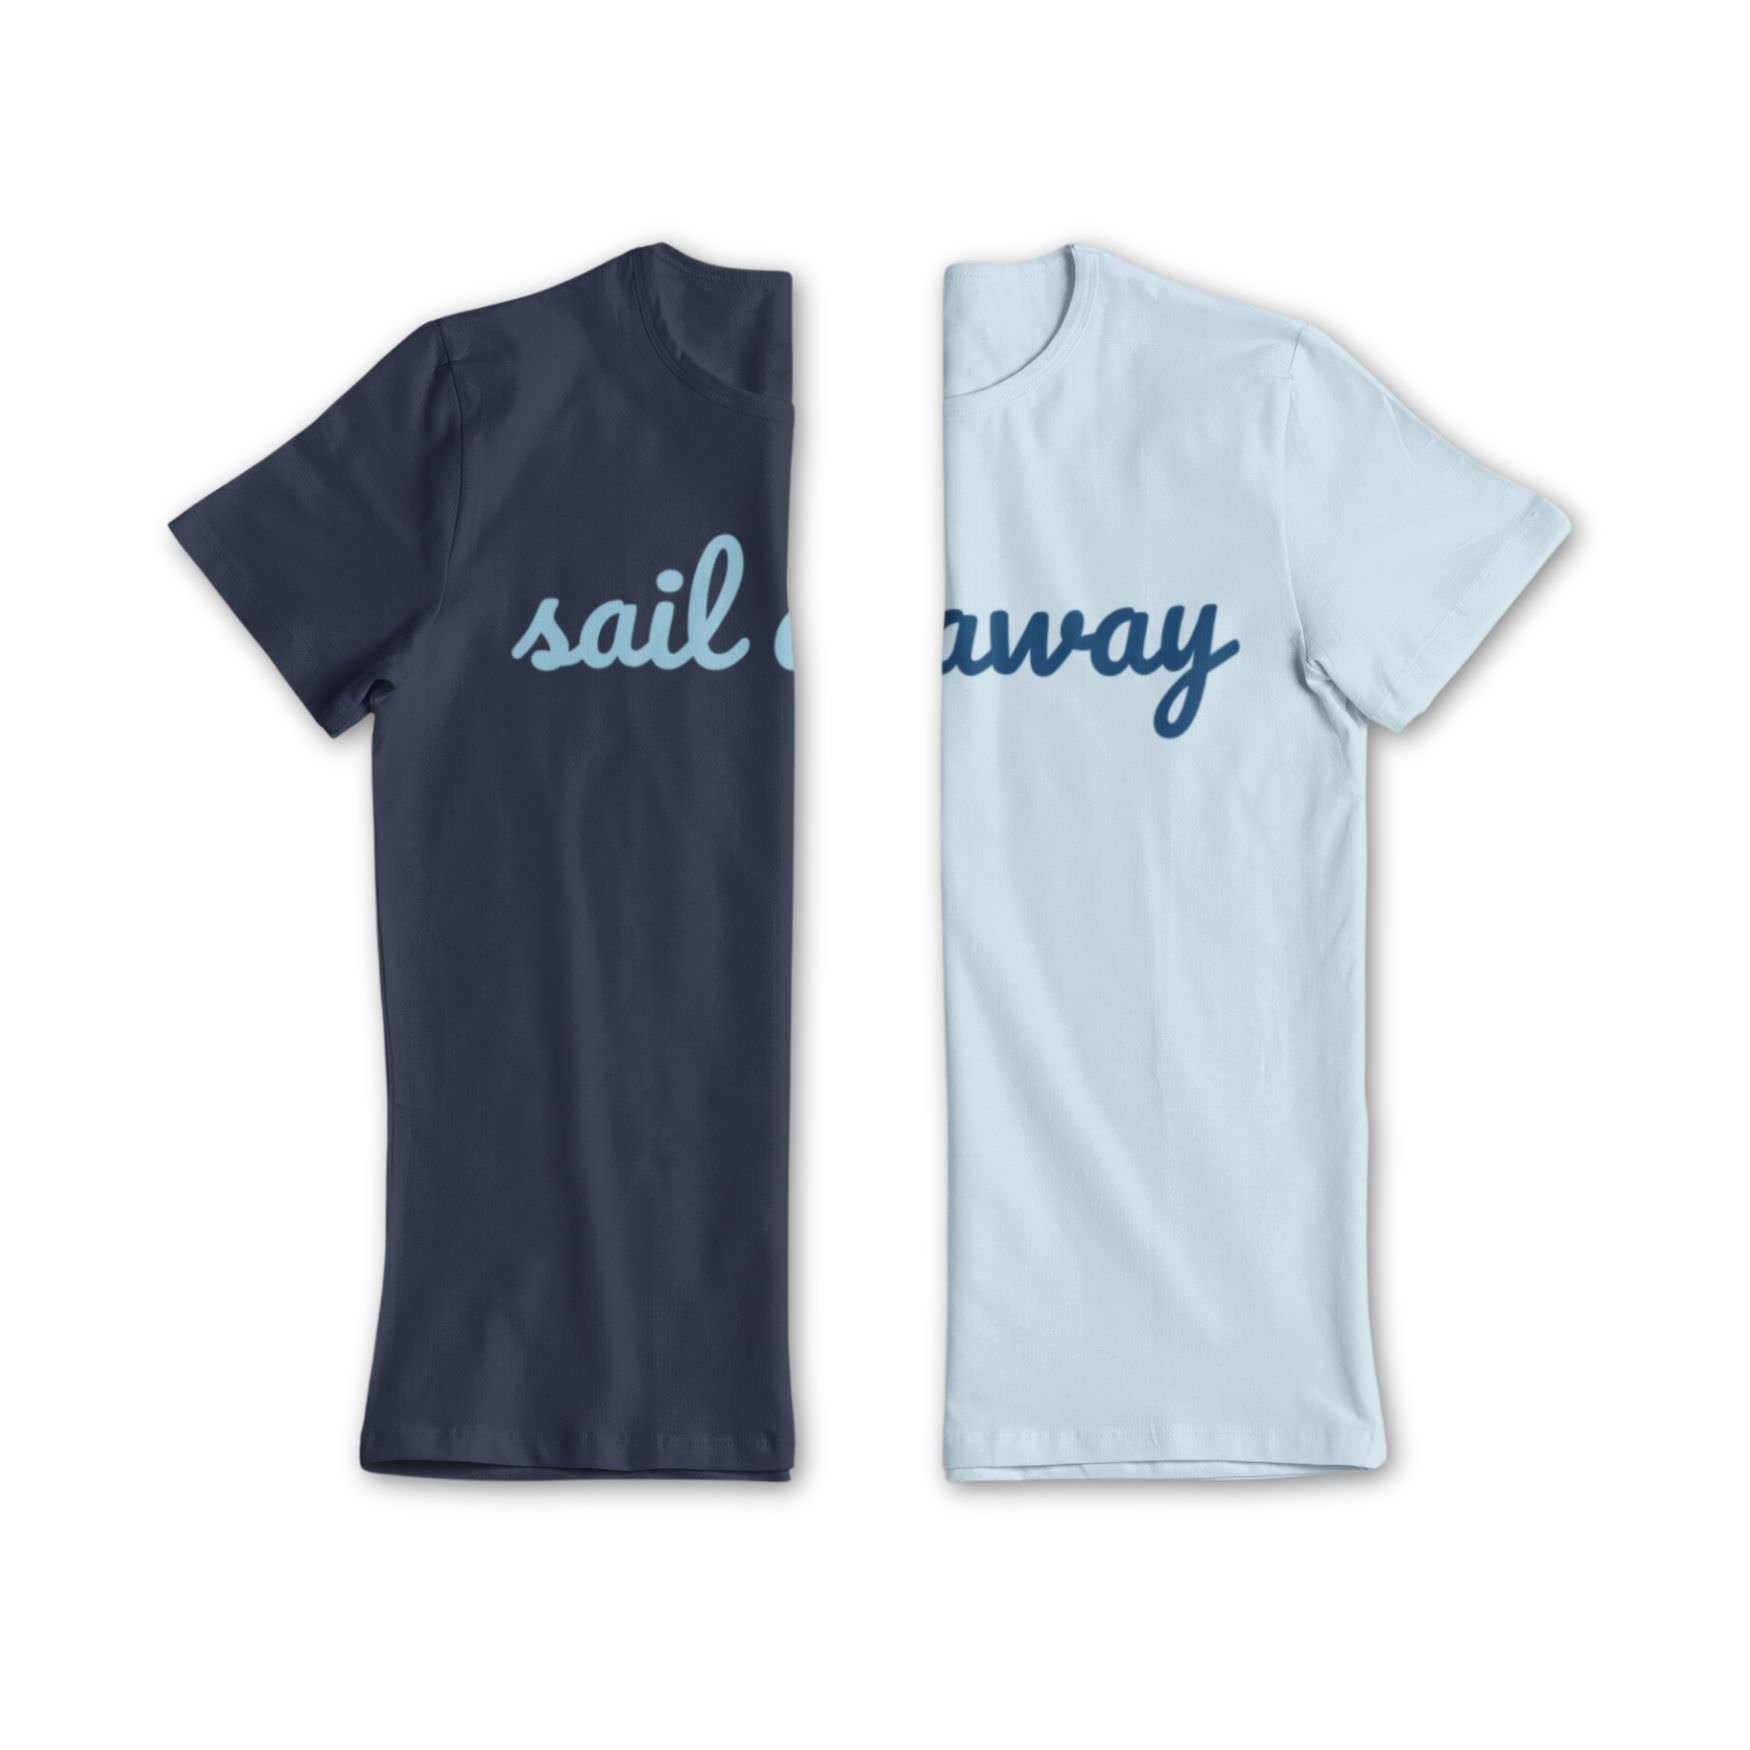 Sail away collection of shirts in cursive writing for sale